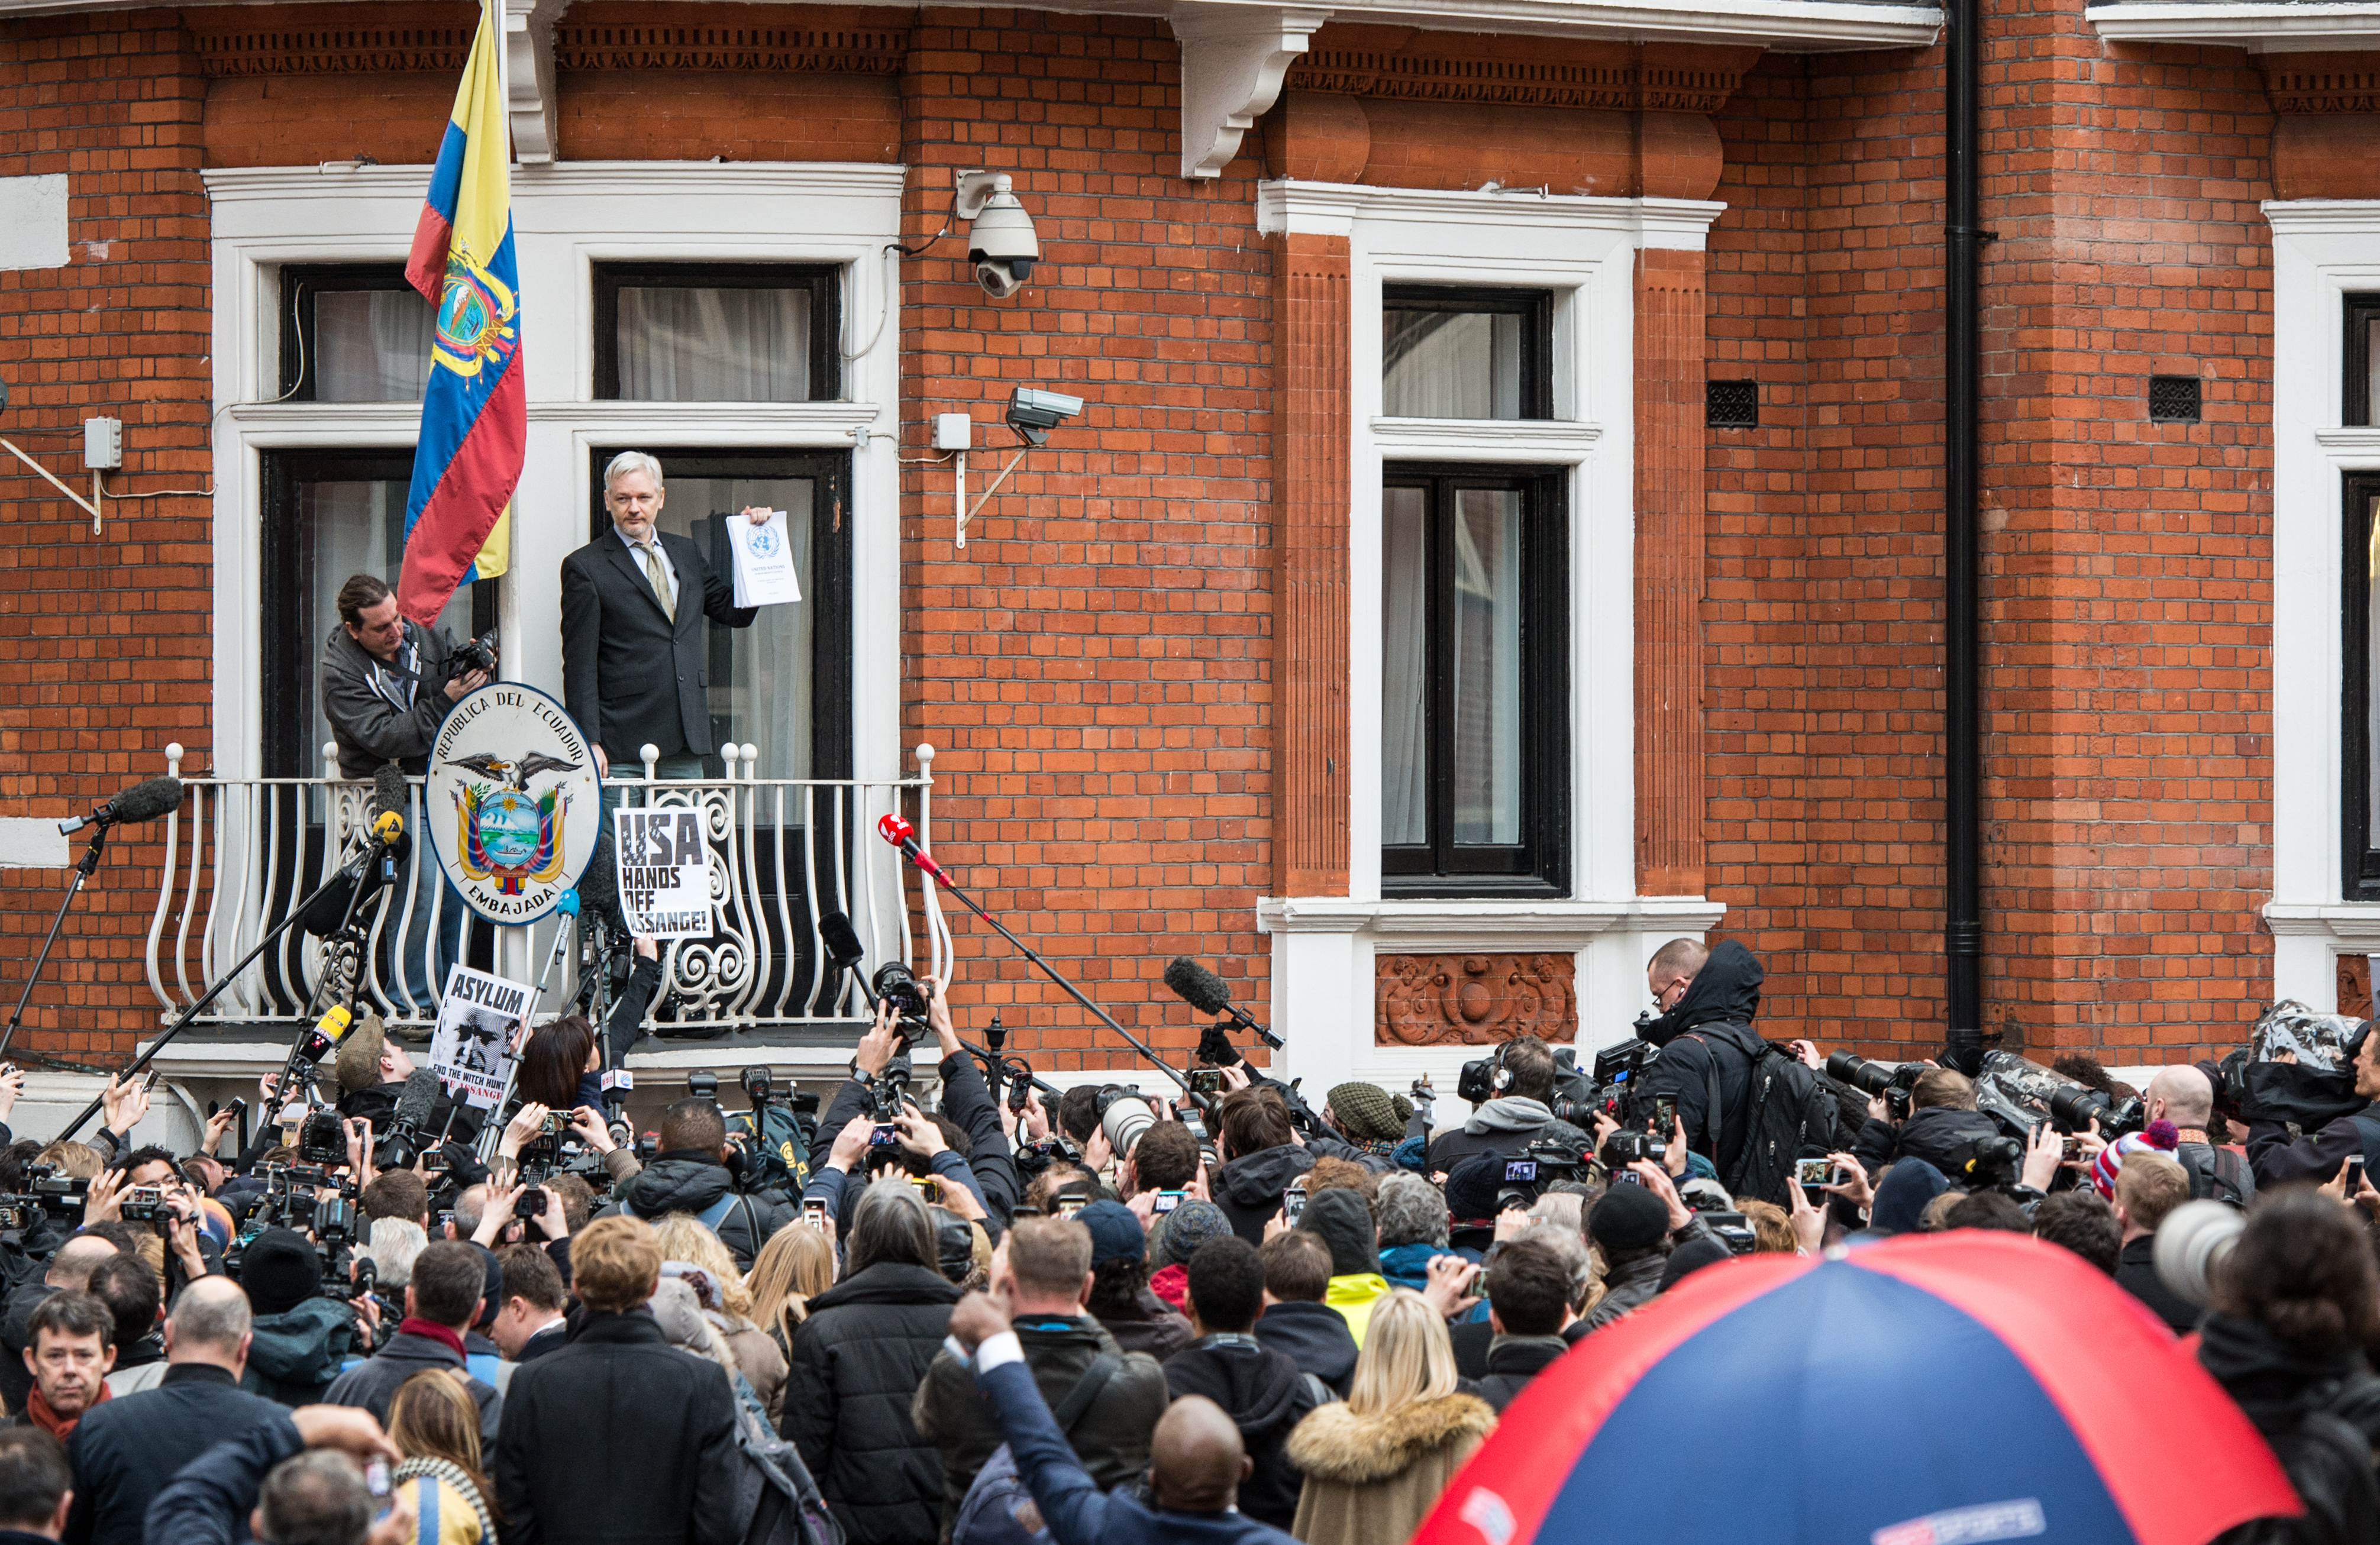 Wikileaks founder Julian Assange speaks from the balcony of the Ecuadorian embassy where  he continues to seek asylum following an extradition request from Sweden, on February 5, 2016 in London. (Chris Ratcliffe—Getty Images)